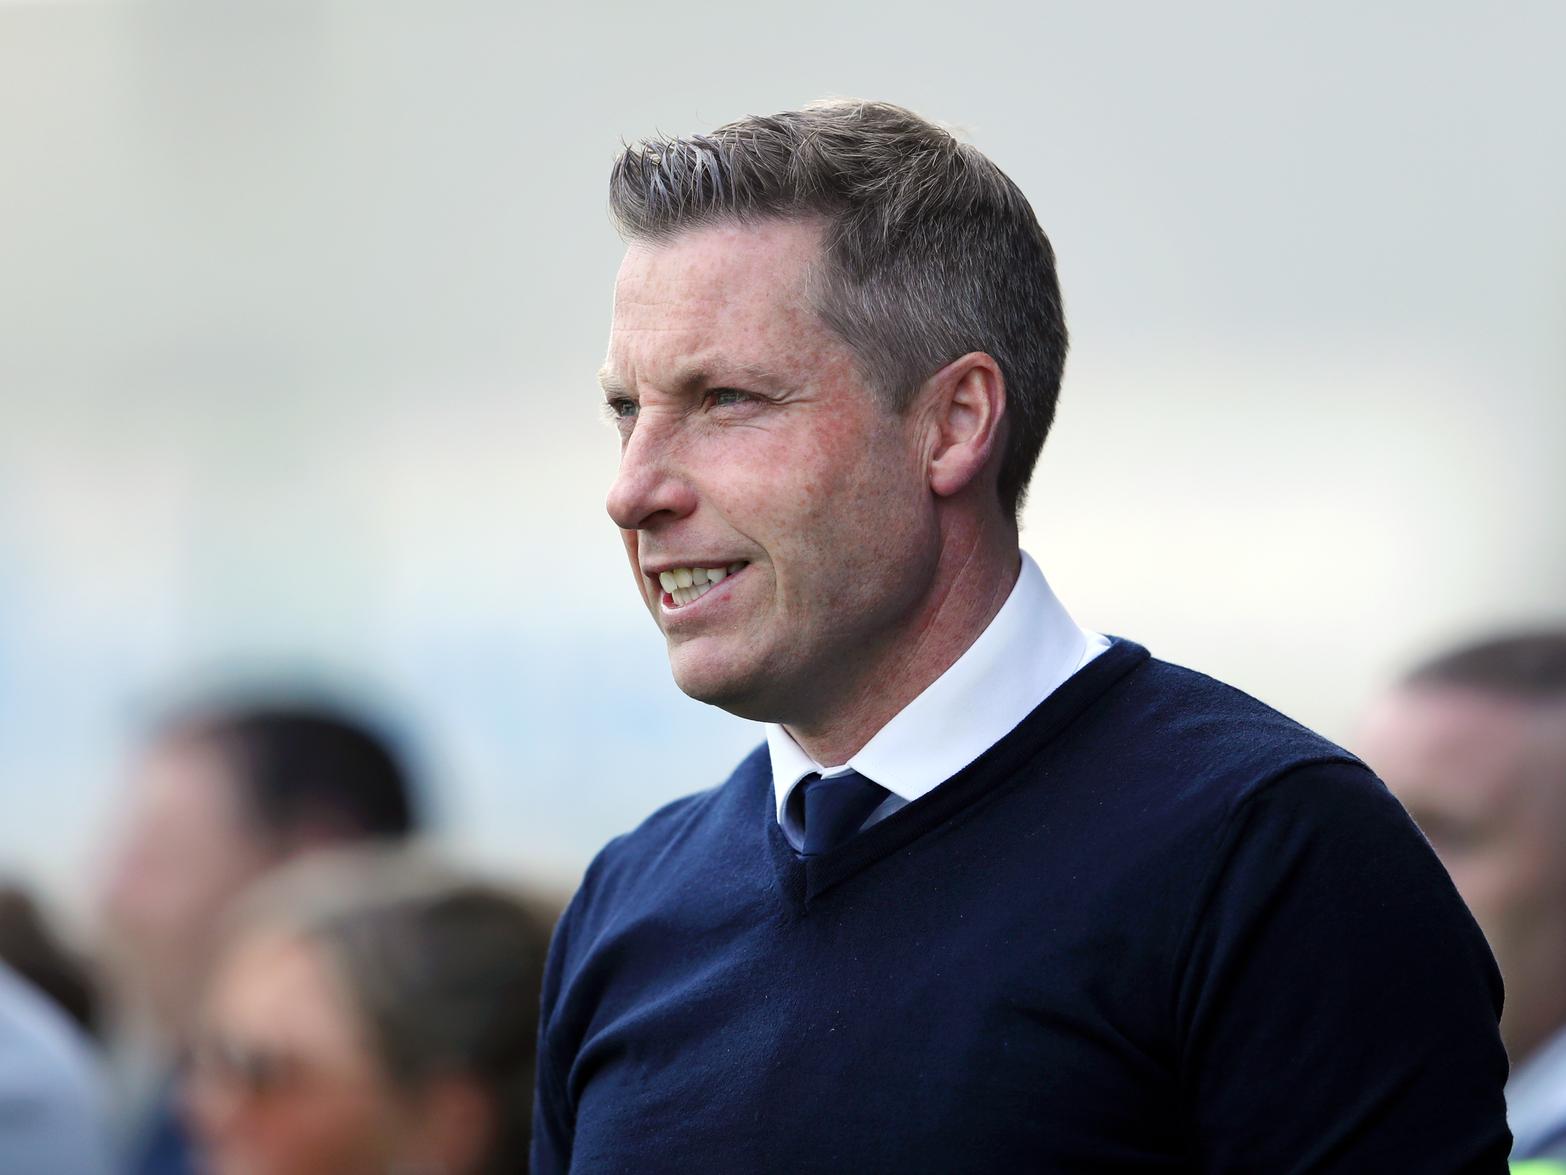 Millwall are on the hunt for a new manager after Neil Harris has stepped down from his role last night, ending his four year reign in charge of the Championship outfit. (Guardian)